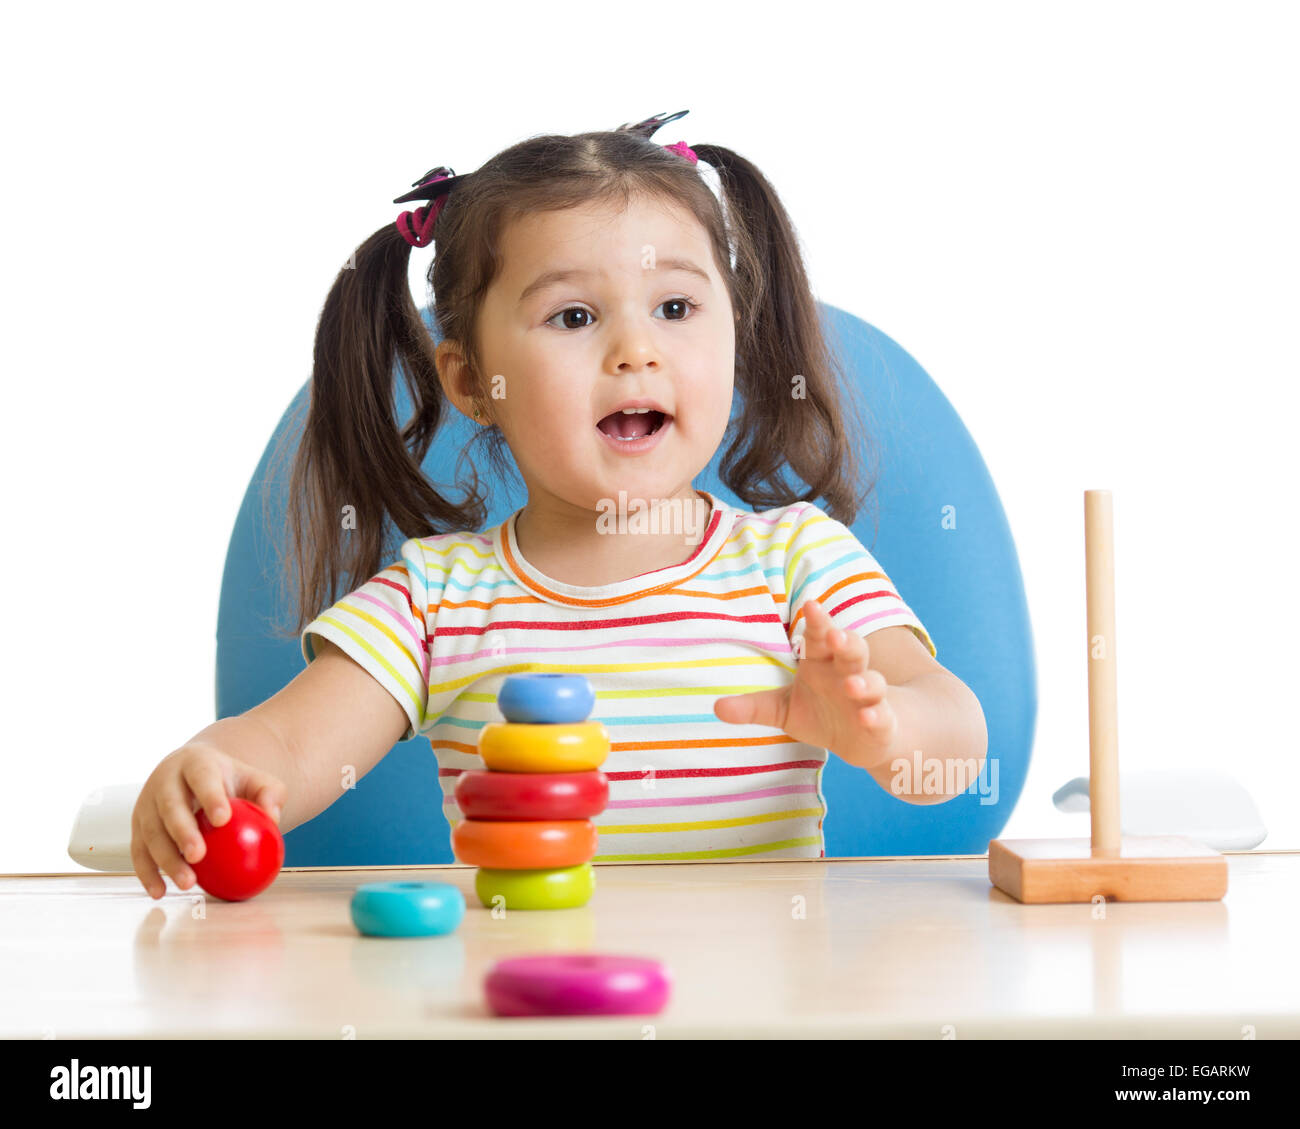 child playing with color pyramid toy Stock Photo